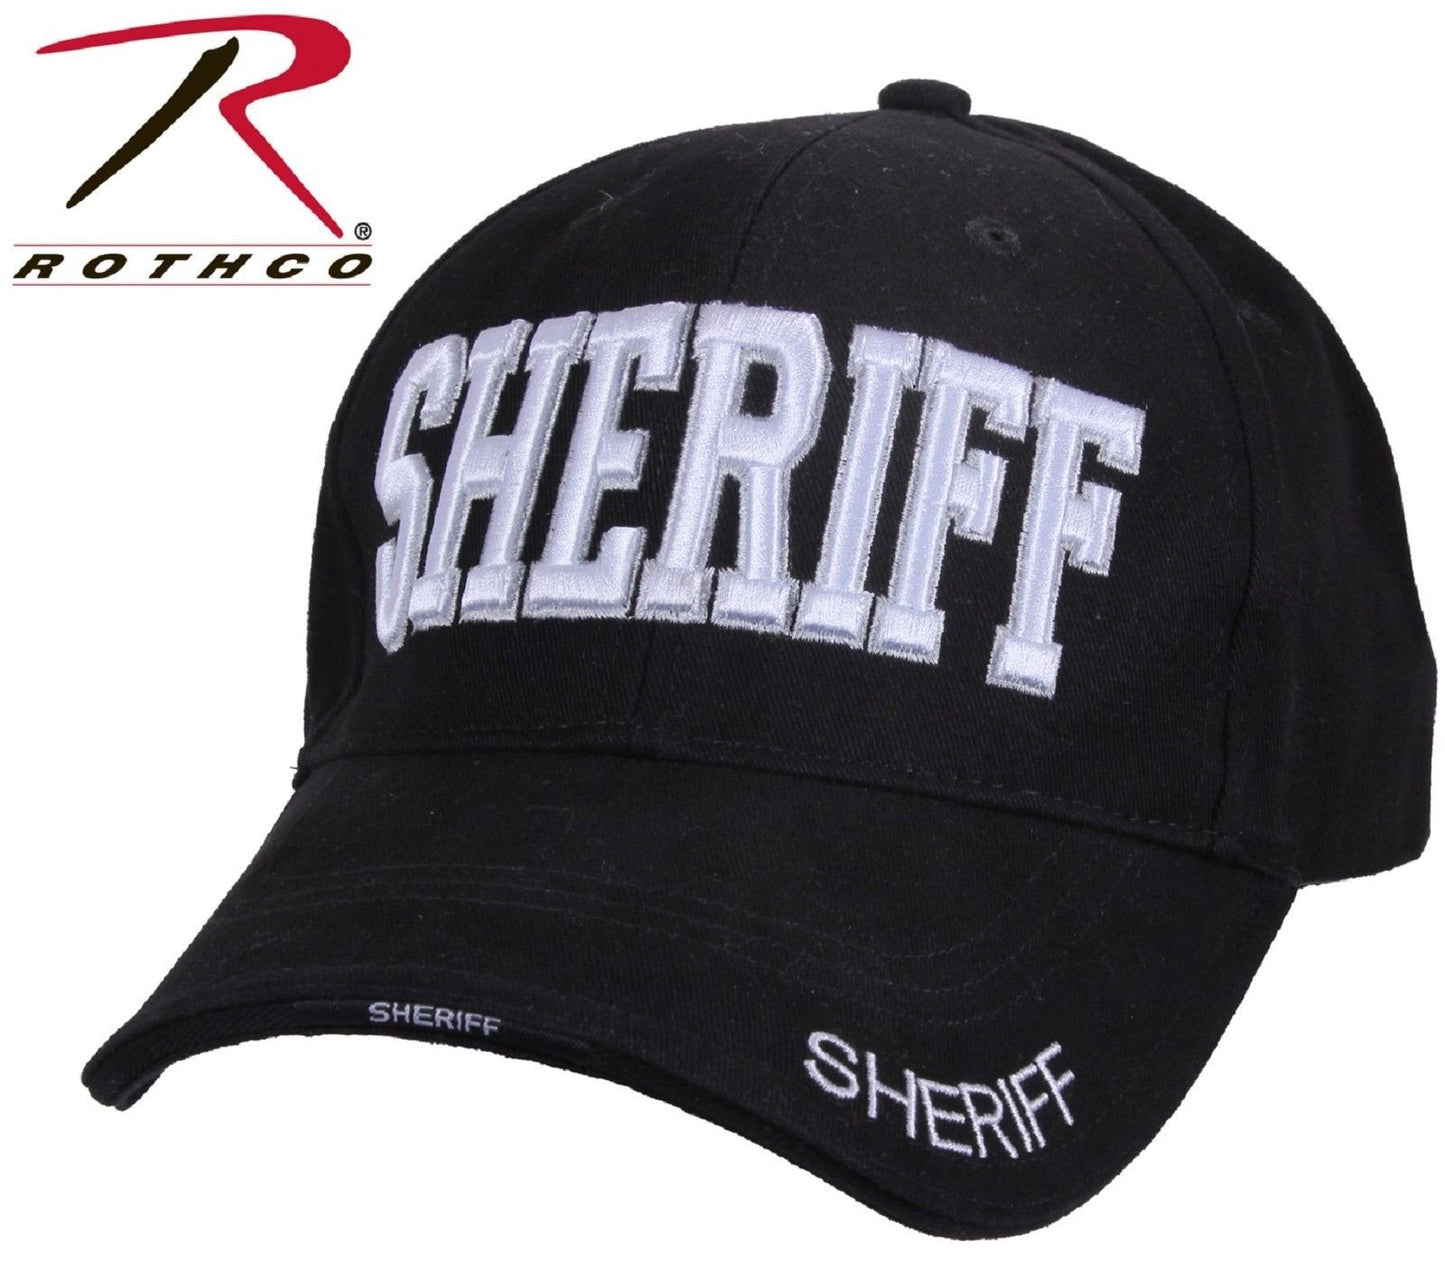 Black Embroidered SHERIFF Deluxe Low-Profile Baseball Hat - Rothco Police Cap